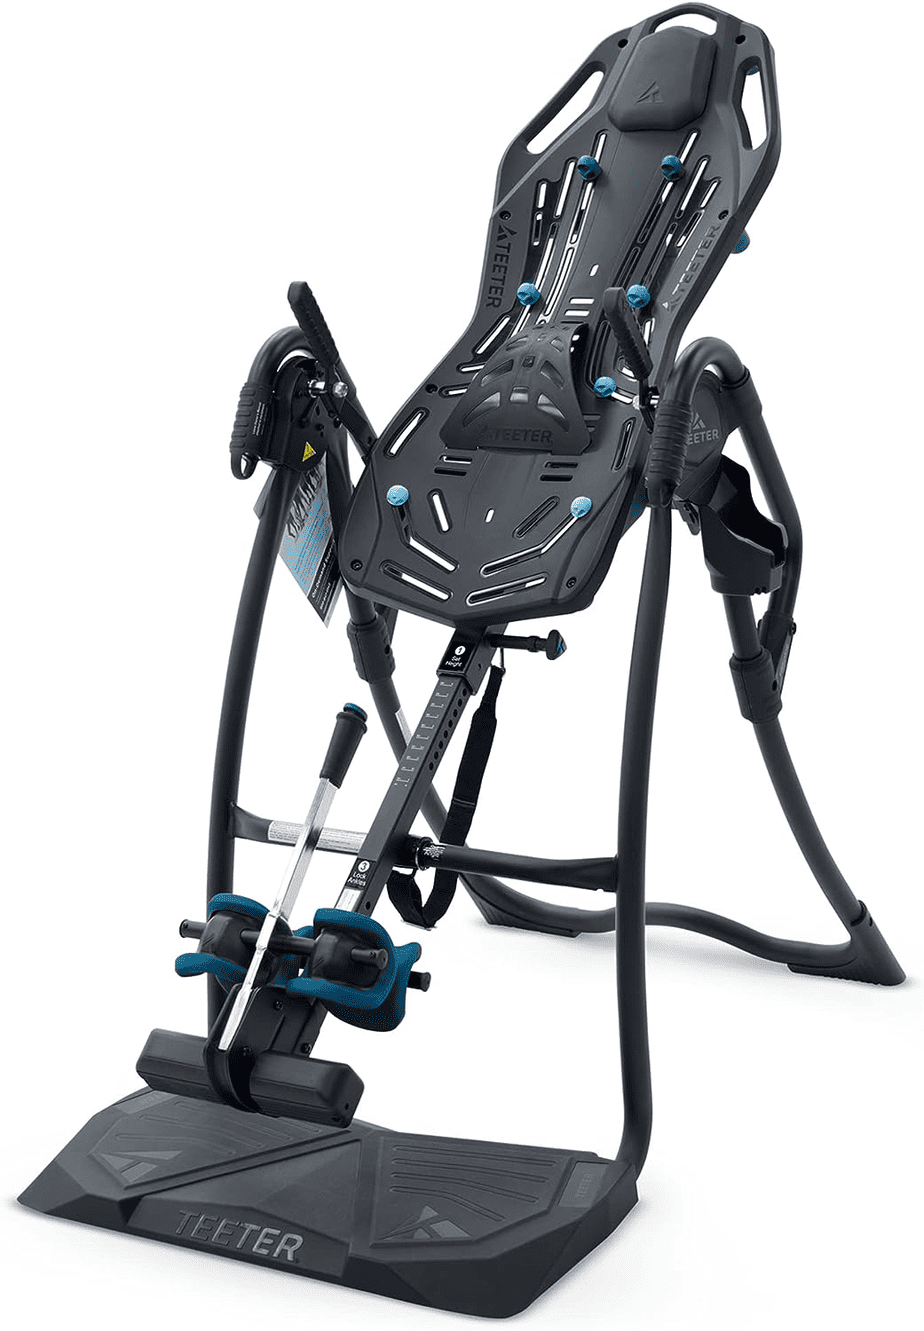 Teeter Fitspine Lx9 Inversion Table For Back Pain Relief